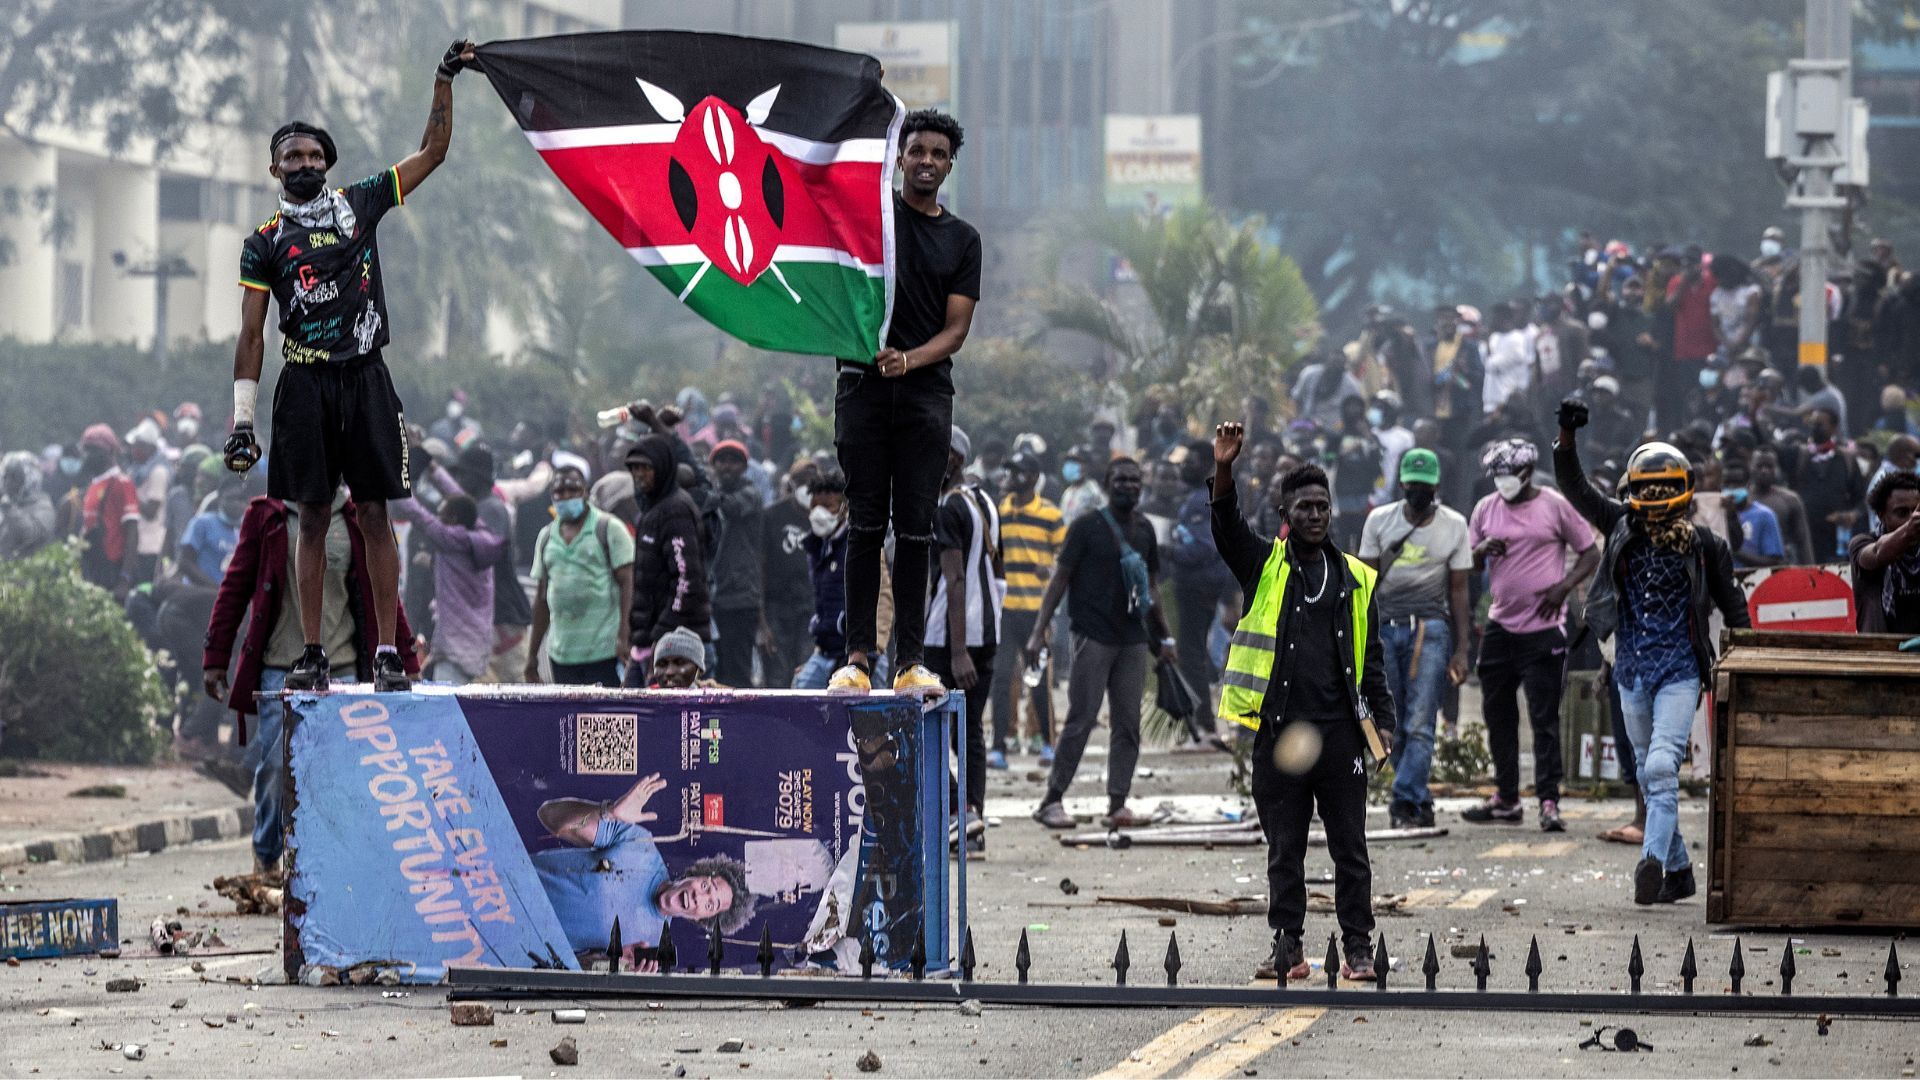 Will the unrest in Kenya escalate? | TV Shows [Video]